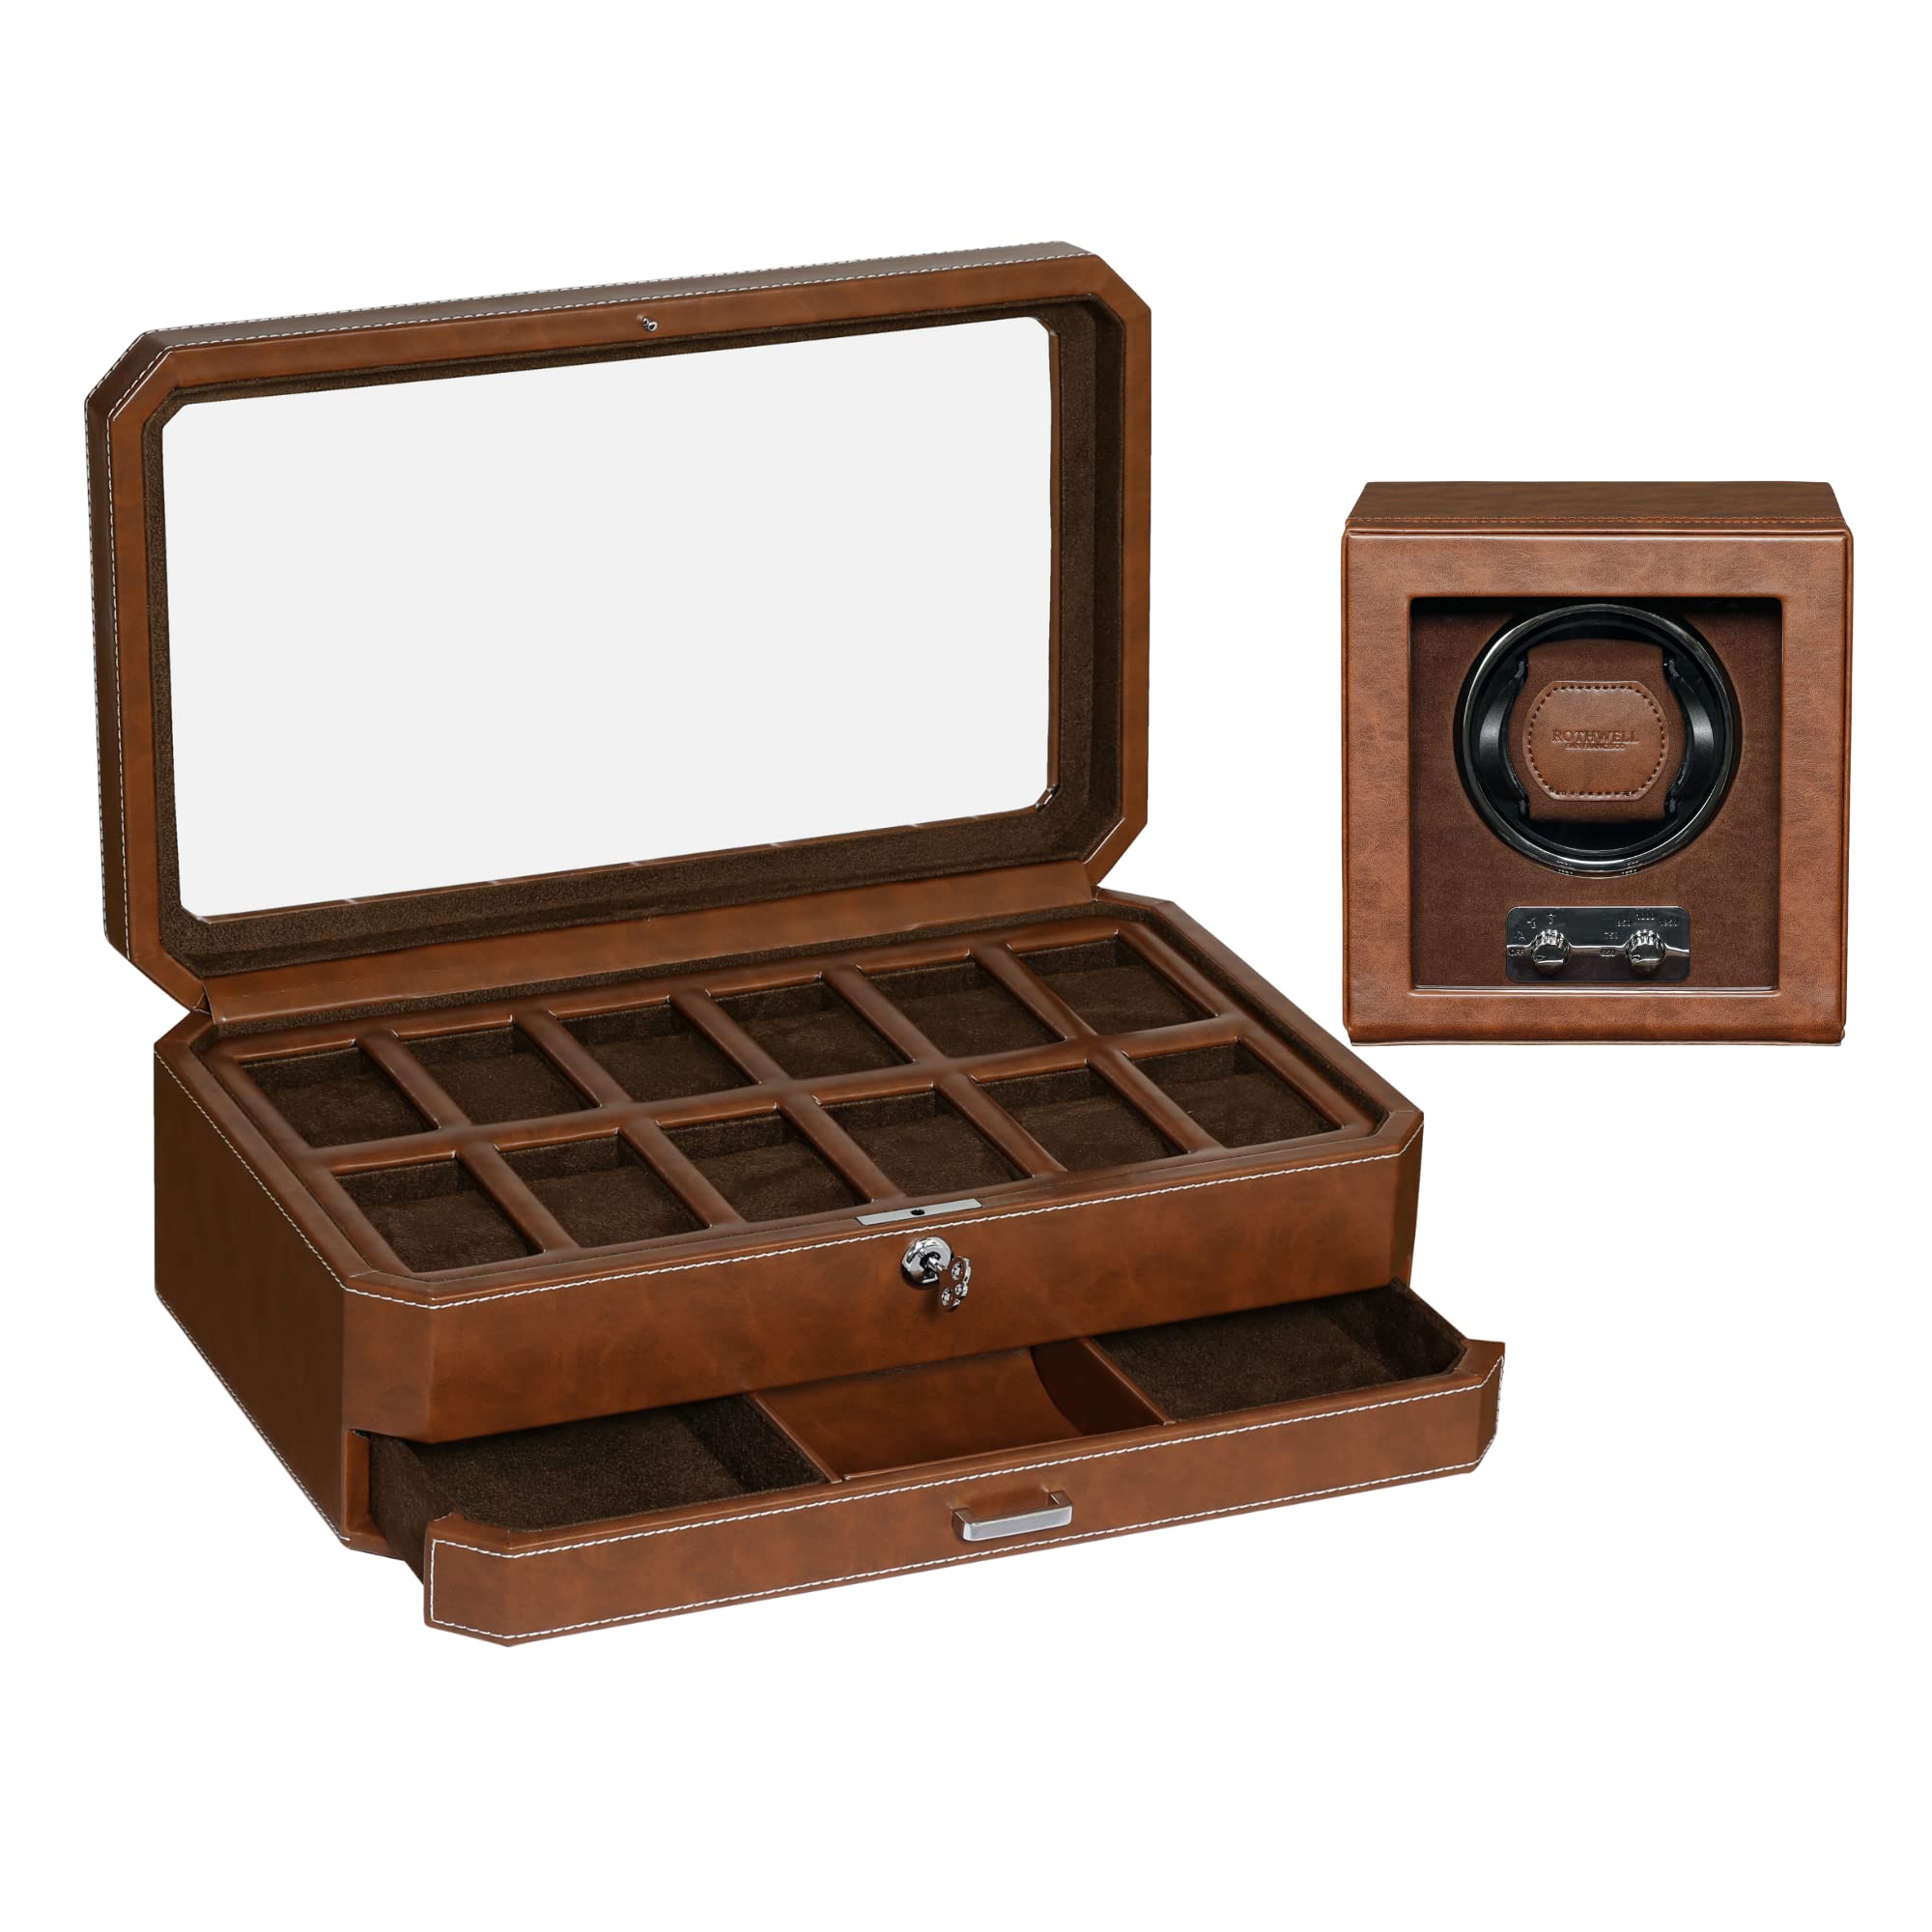 Gift Set 12 Slot Leather Watch Box with Valet Drawer & Matching Single Watch Winder - Luxury Watch Case Display Organizer, Locking Mens Jewelry Watches Holder, Men's Storage Boxes Glass Top Tan/Brown